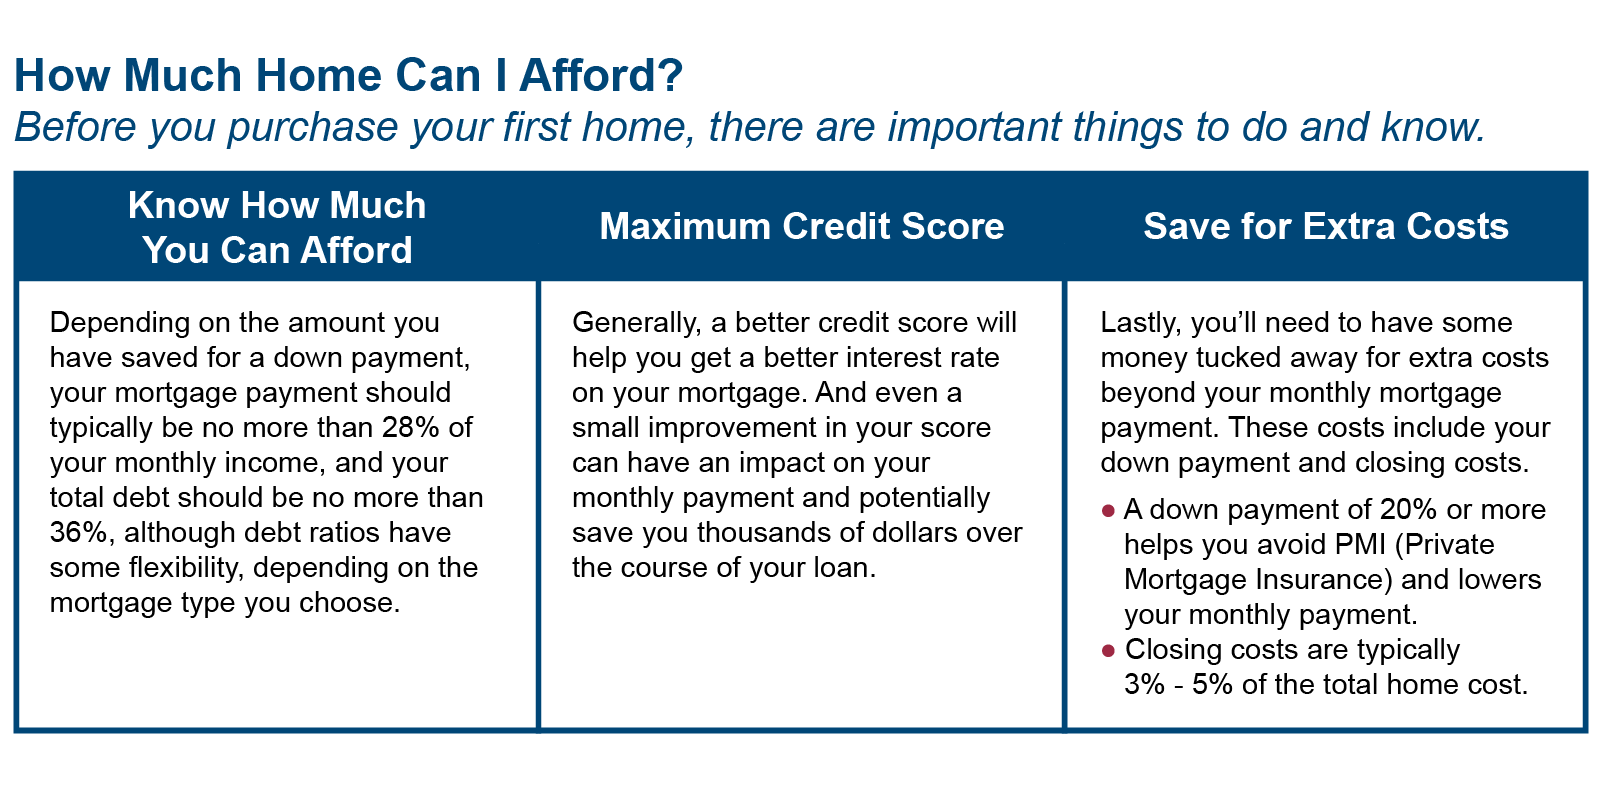 Before you purchase a home, there are important things to do and know: Know how much you can afford. Maximum credit score. Save for extra costs. 